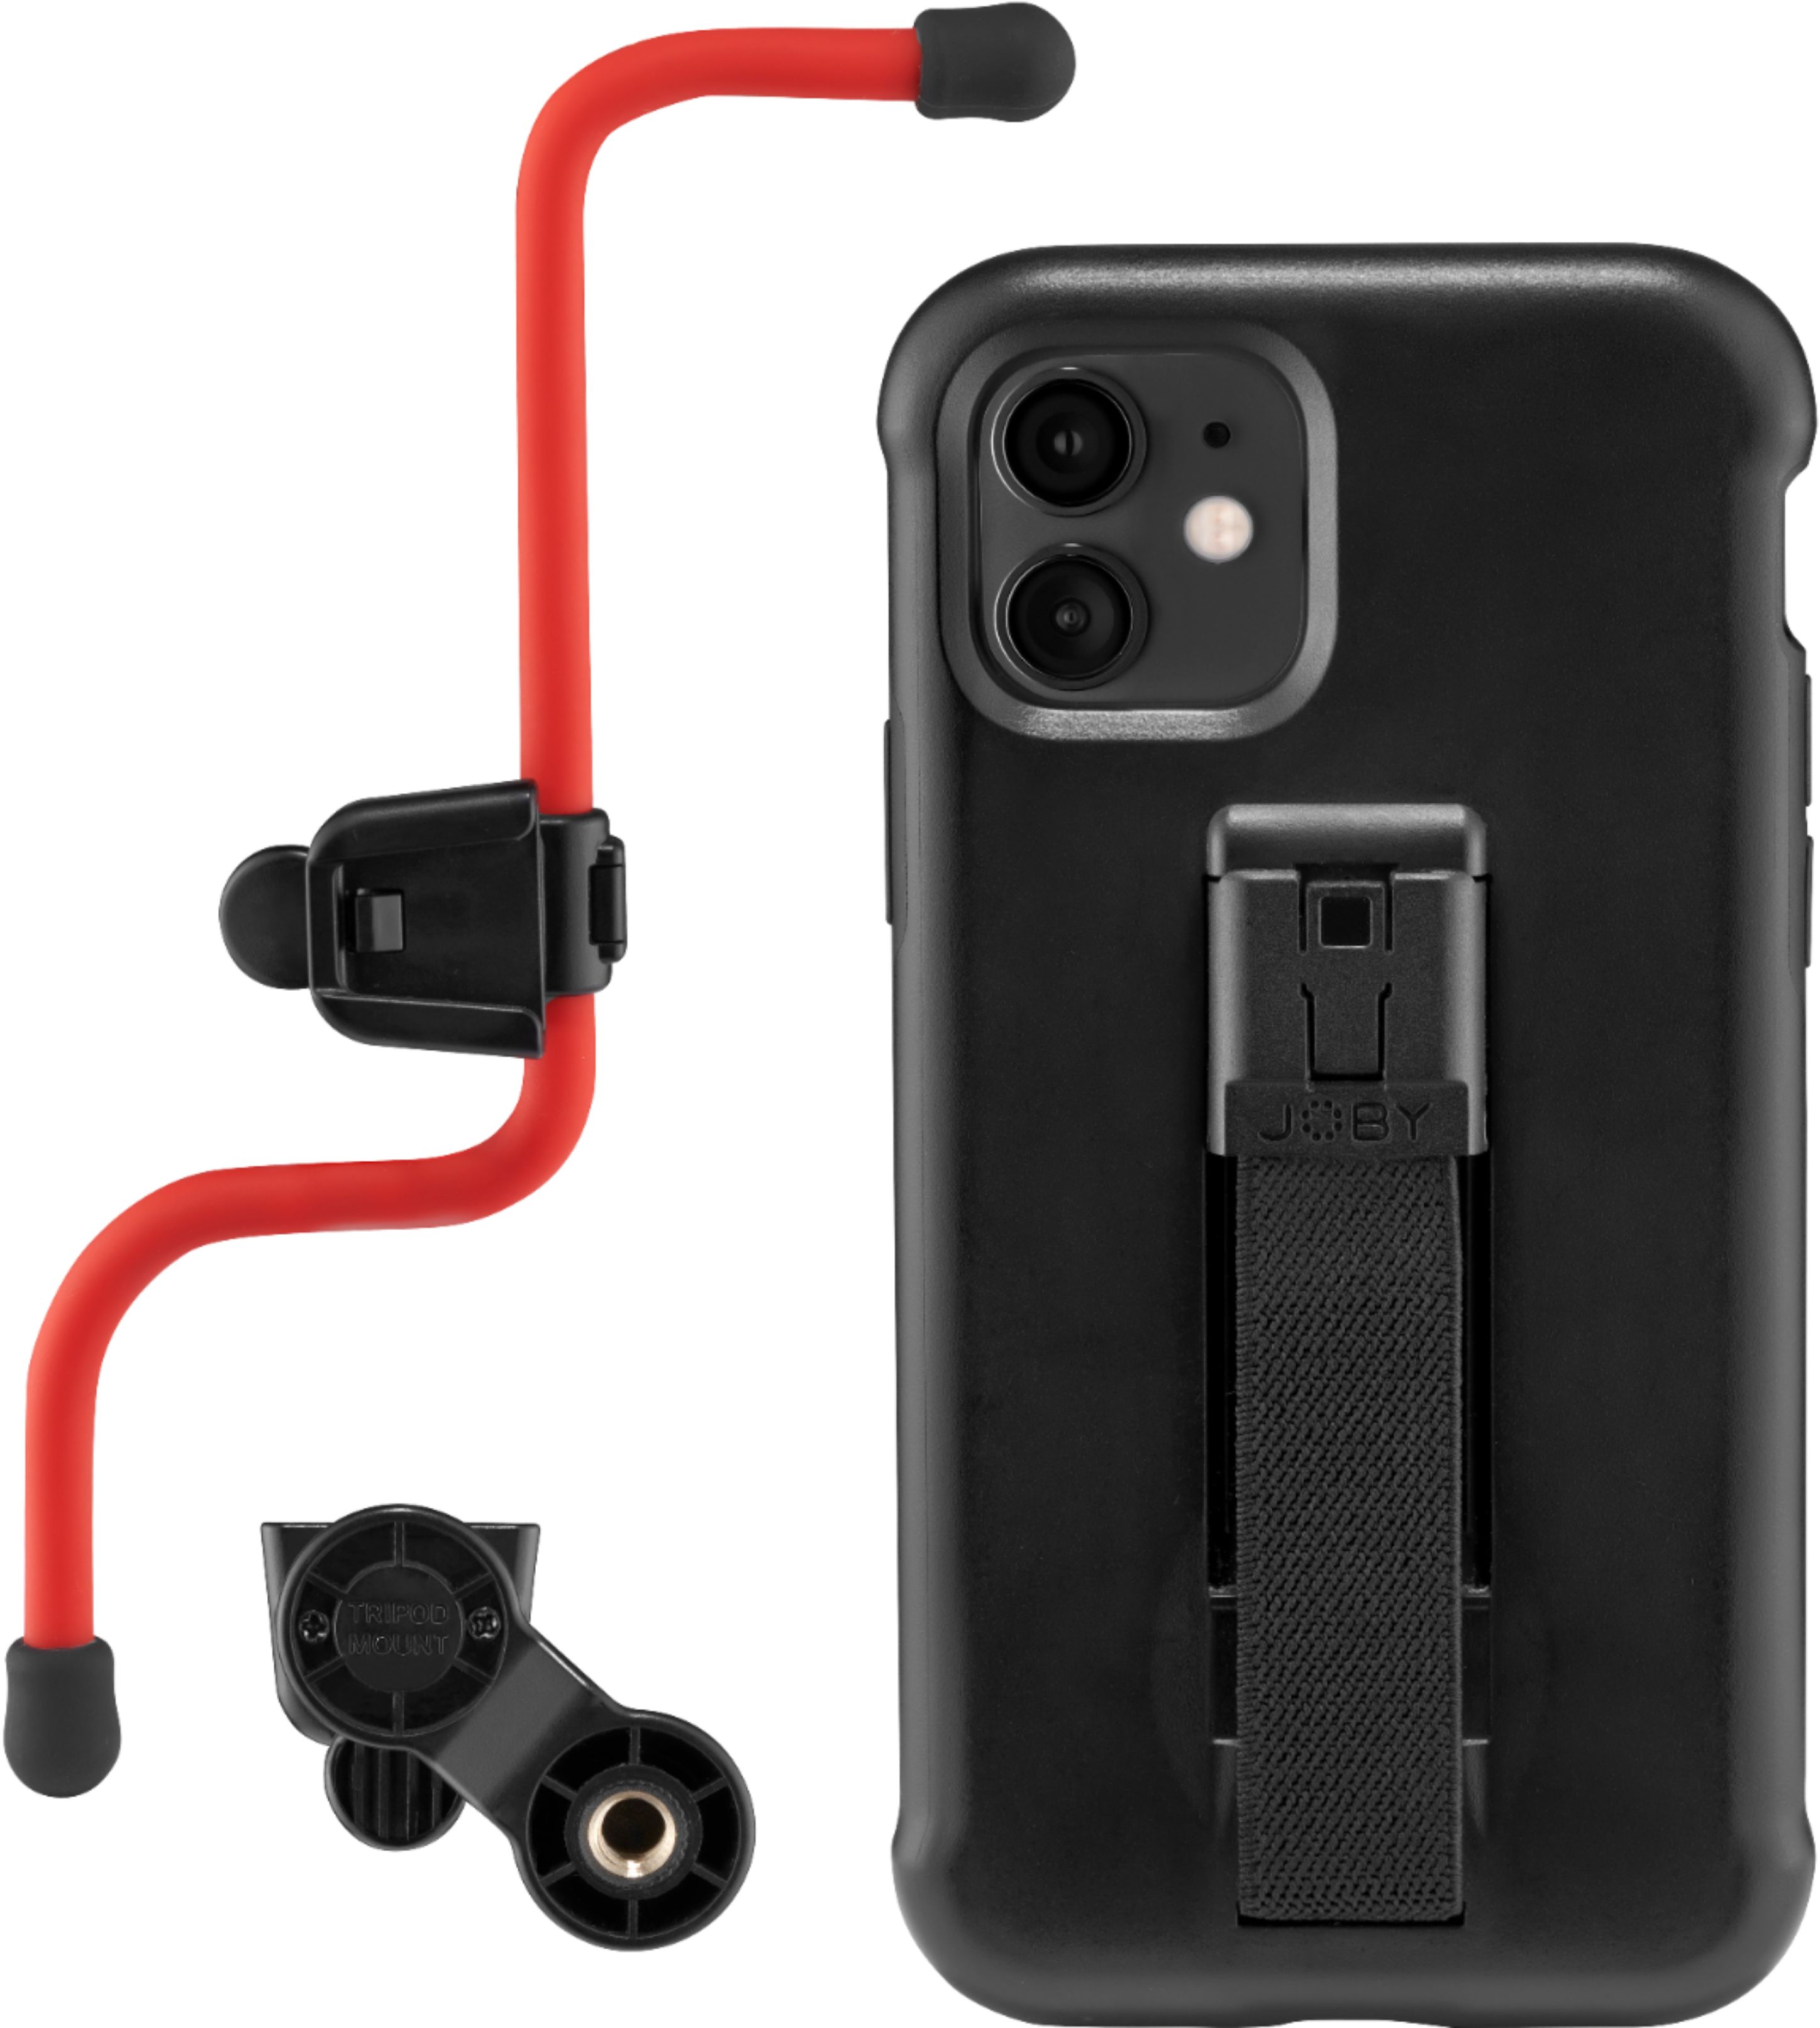 Angle View: JOBY - Freehold Kit Phone Case with Finger Loop Strap, Wrapping Arms, and 1/4" Tripod Adapter for iPhone 11